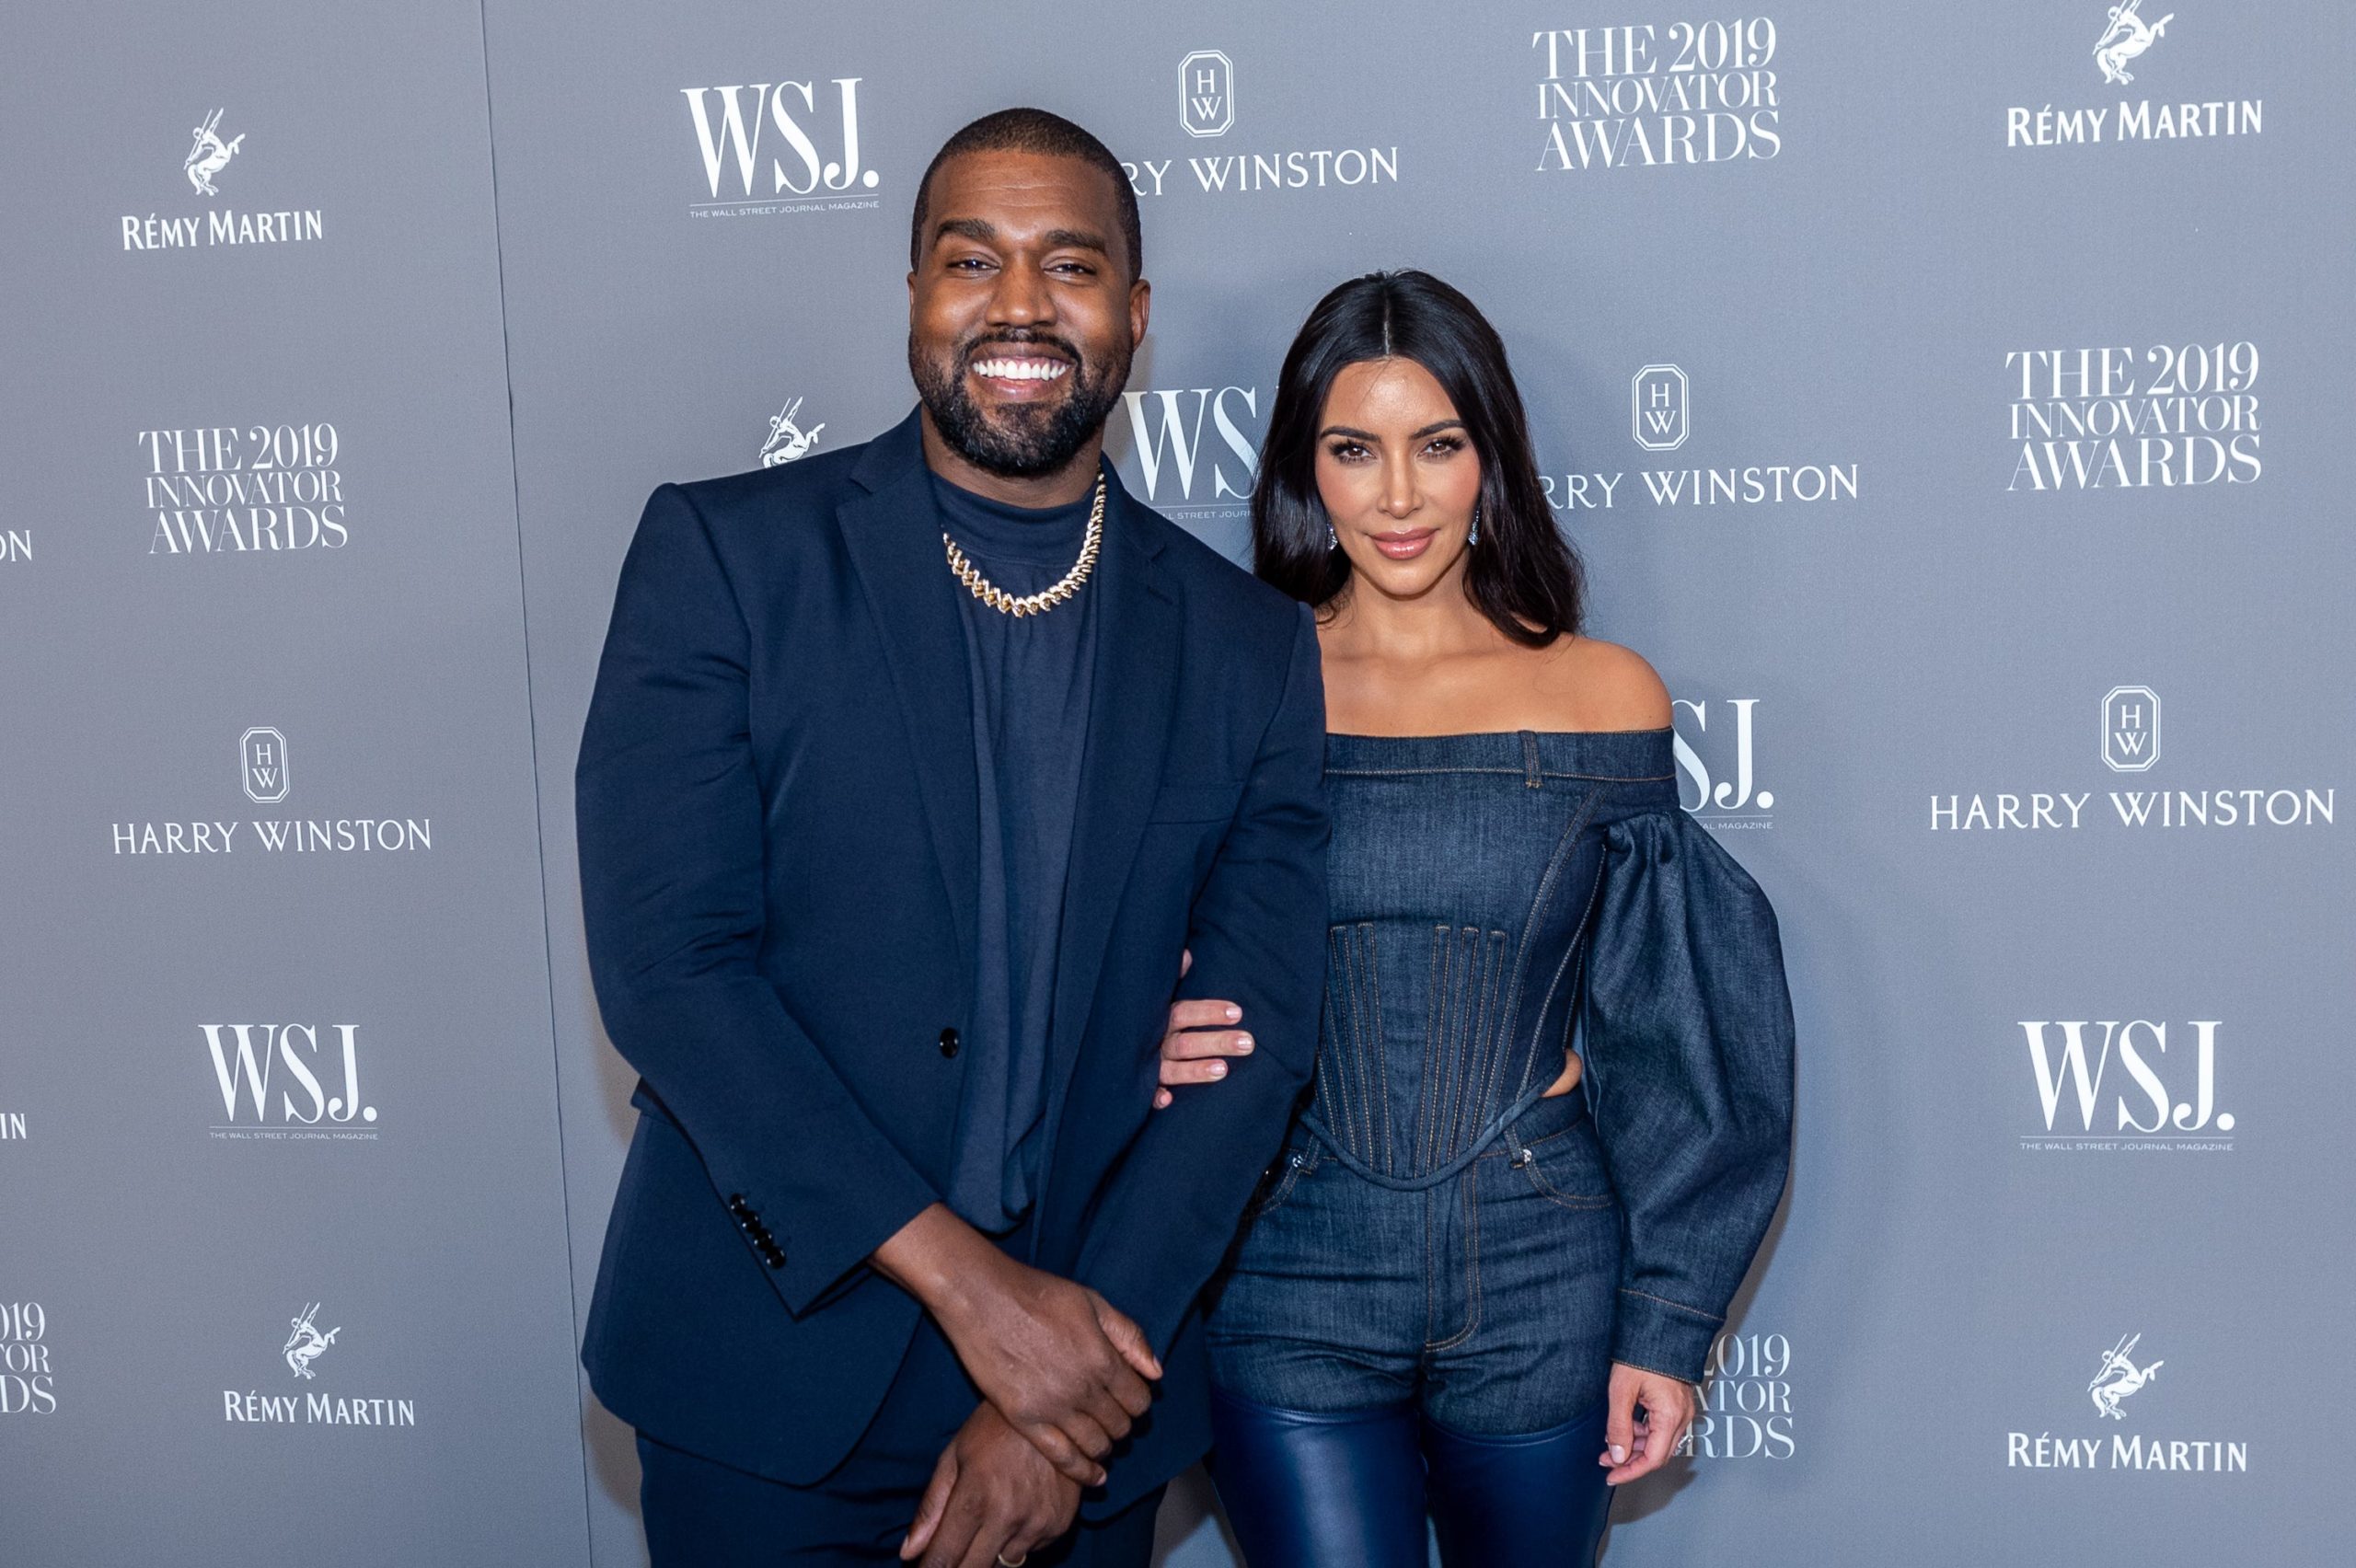 Kanye West Bragging That Kim Kardashian ‘Doesn’t Have The Guts’ To Go Through With $1 Billion Divorce?